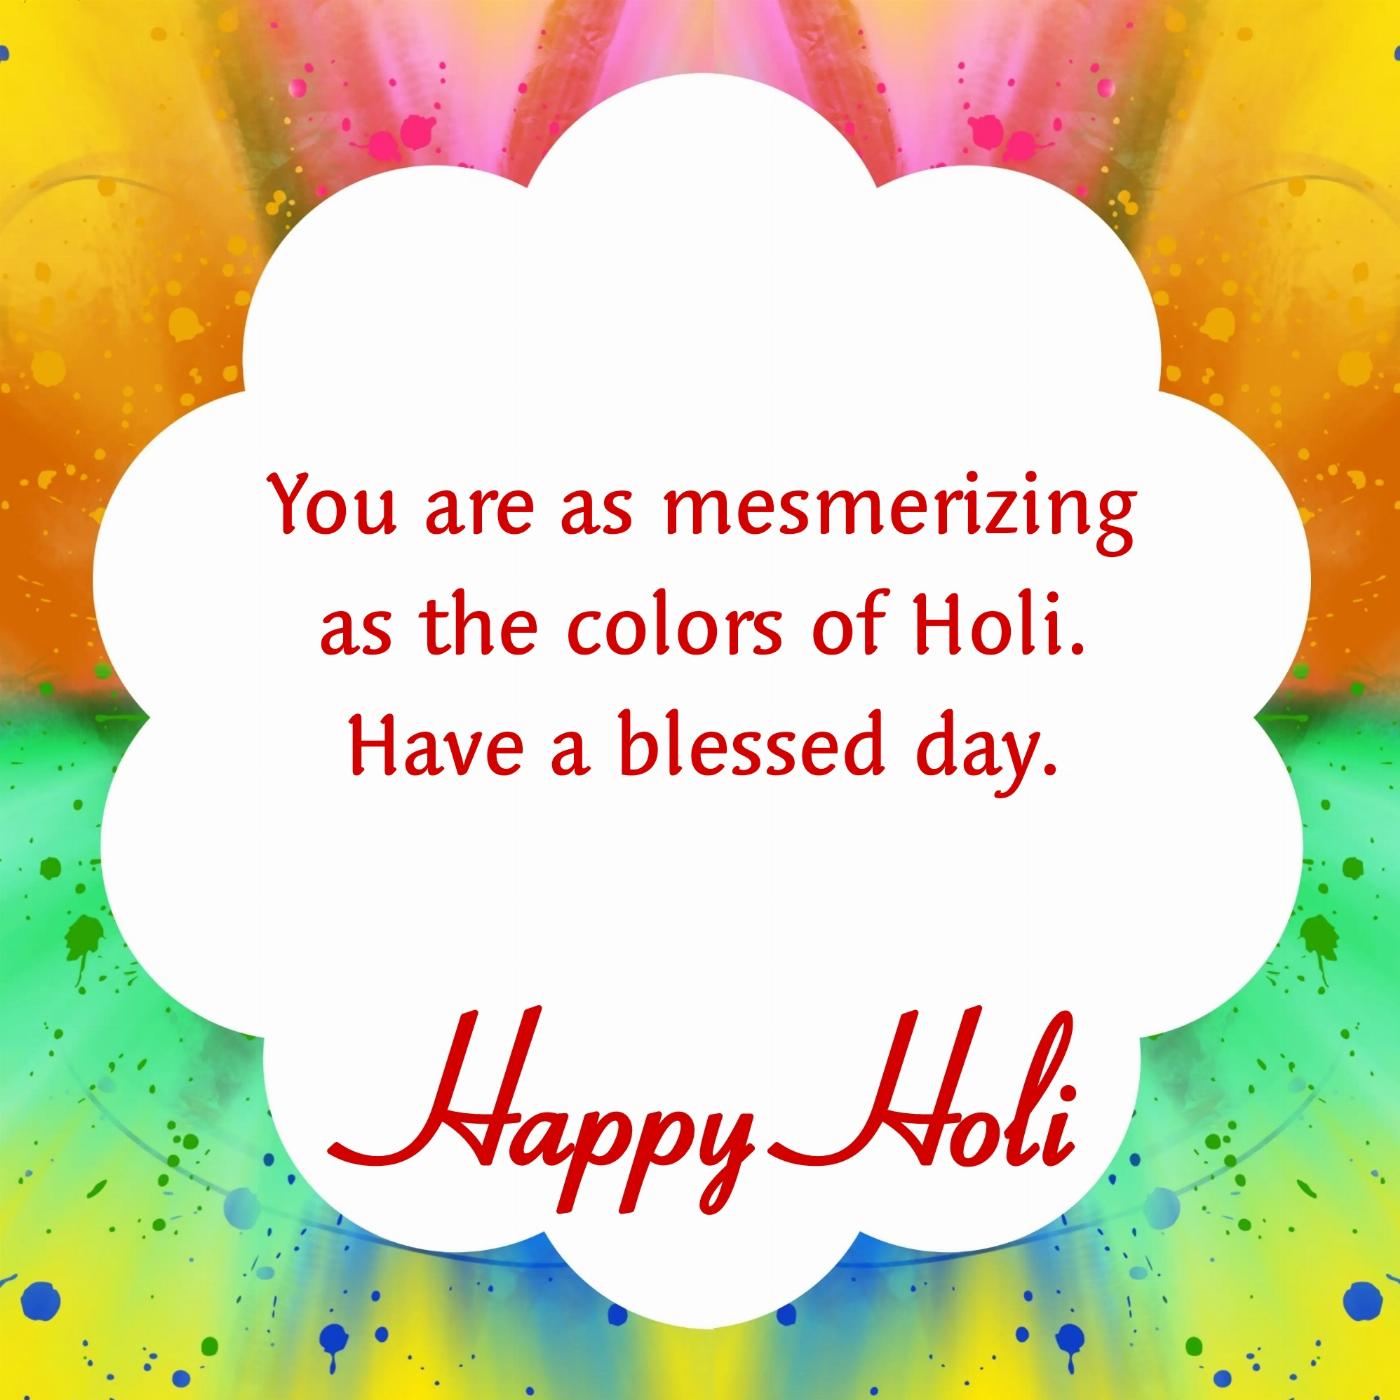 You are as mesmerizing as the colors of Holi